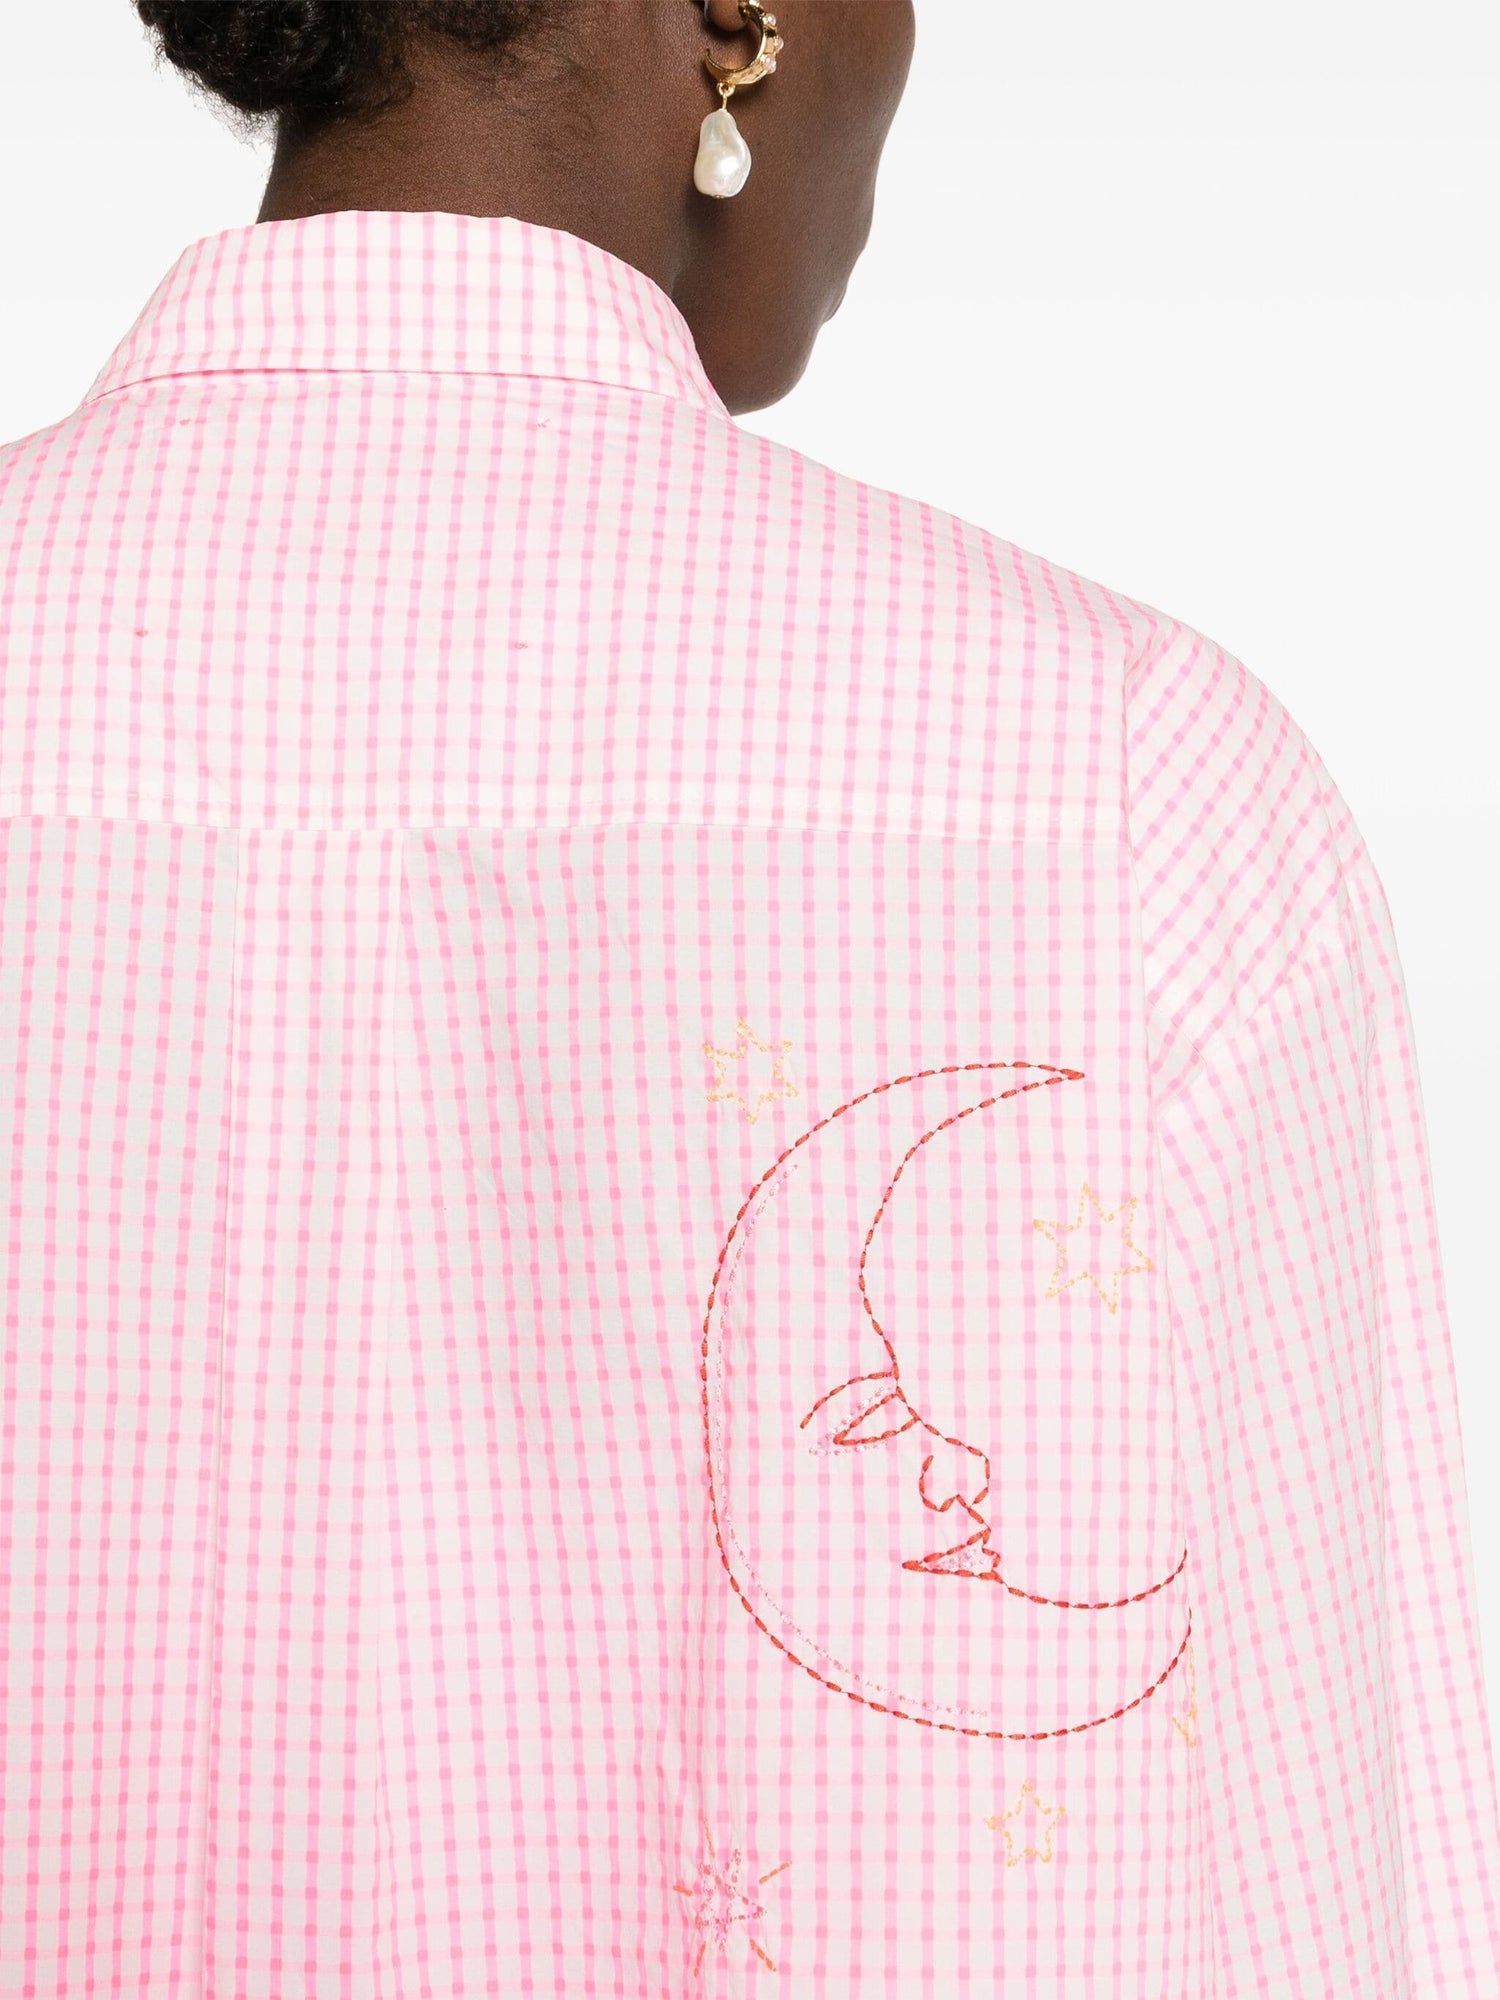 Popline check shirt with embroidery, pink